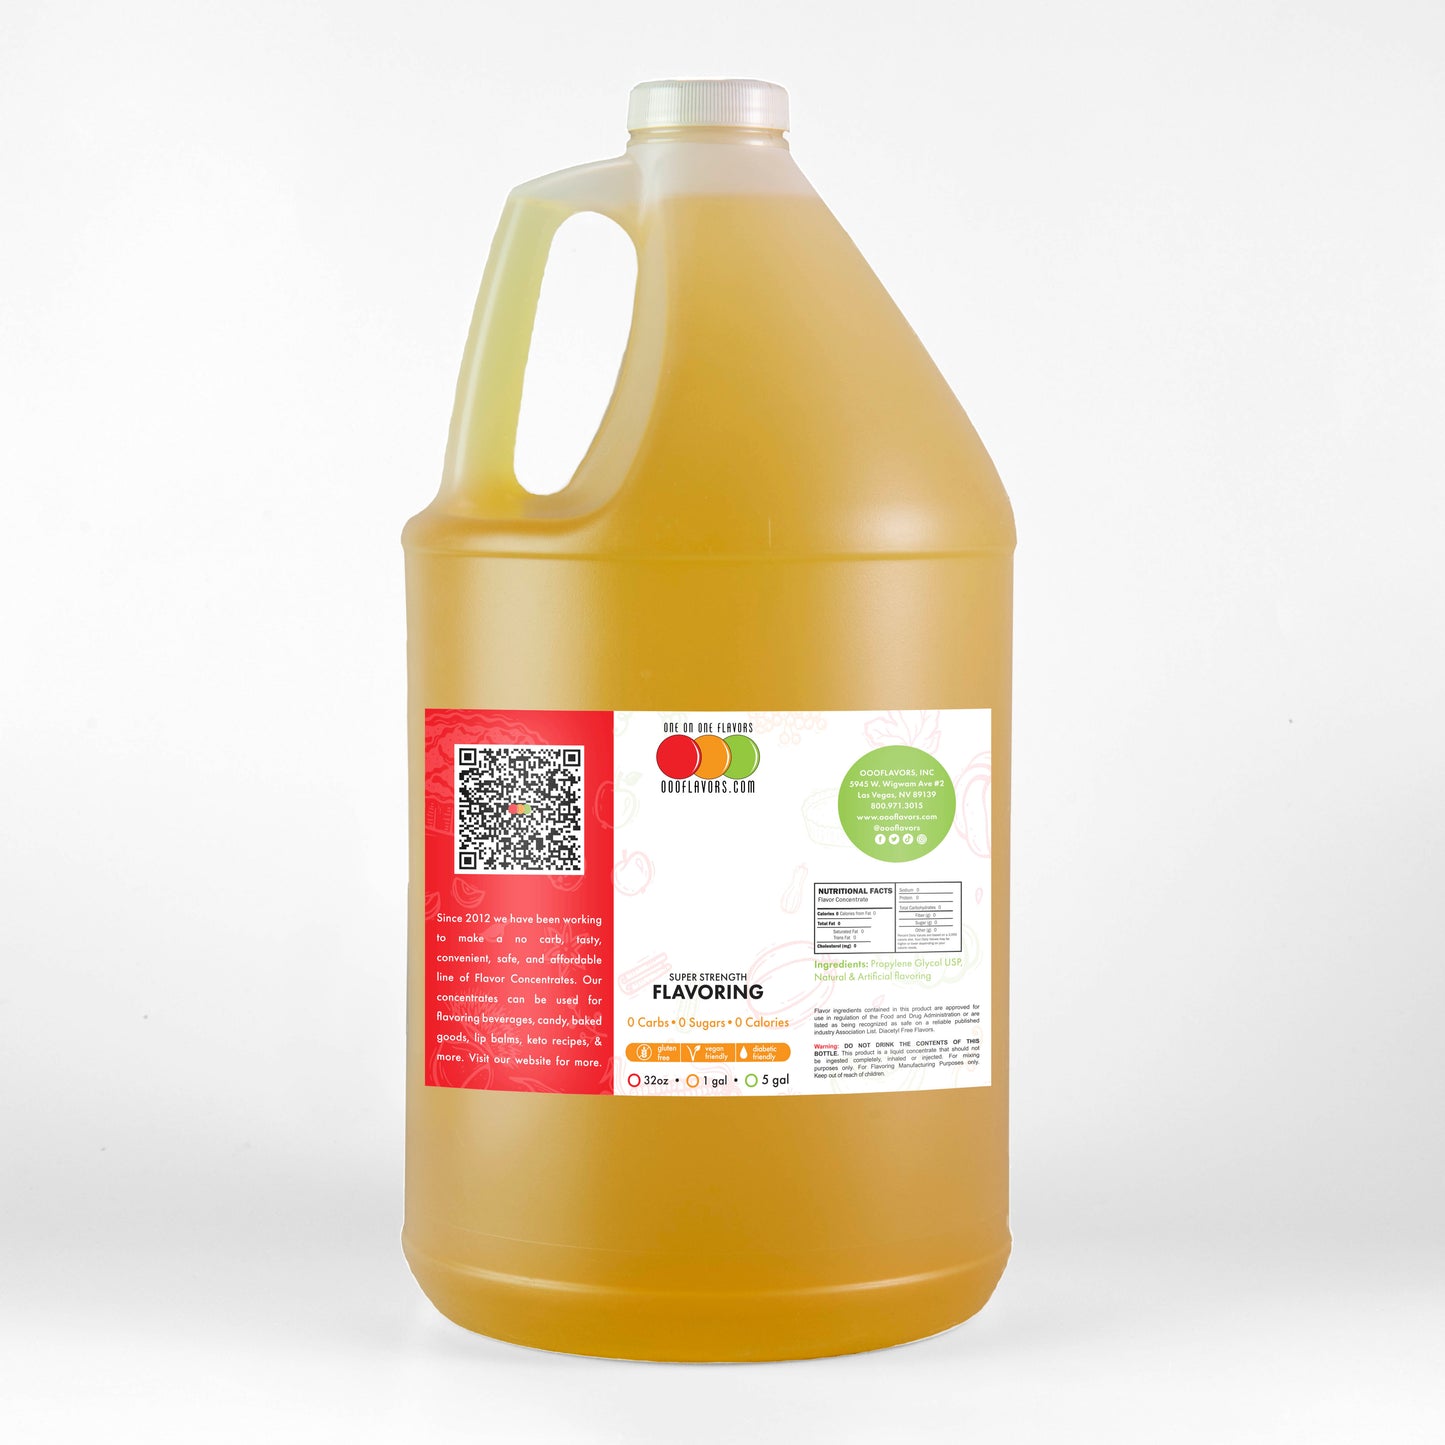 Apple (Juice) Flavored Liquid Concentrate